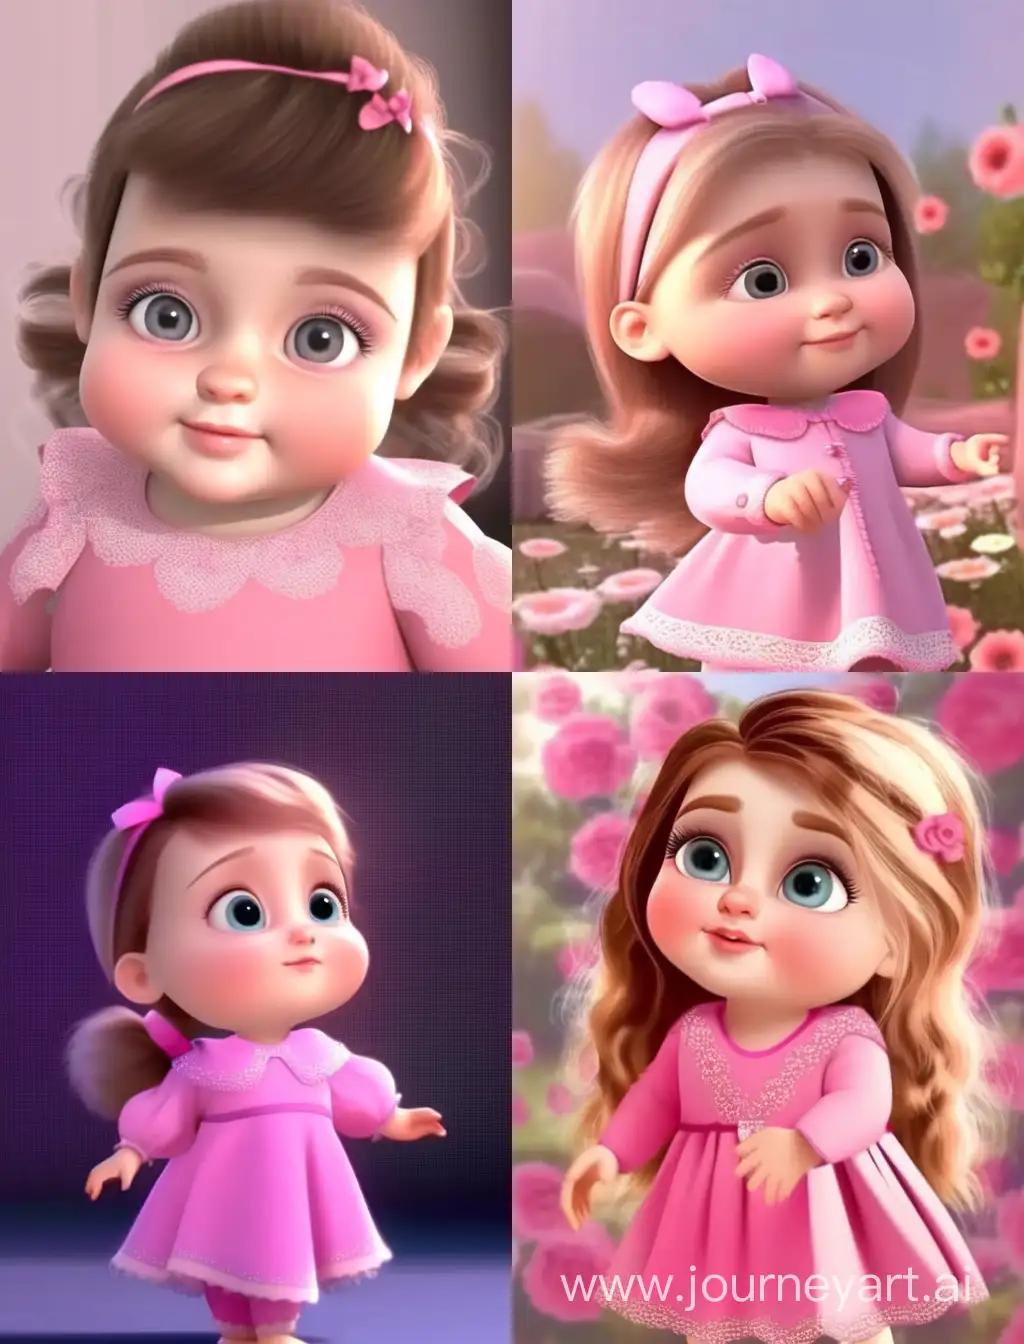 Enchanting-3D-Animation-Adorable-Baby-in-Glowing-Pink-Dress-Dancing-with-Magical-Charm